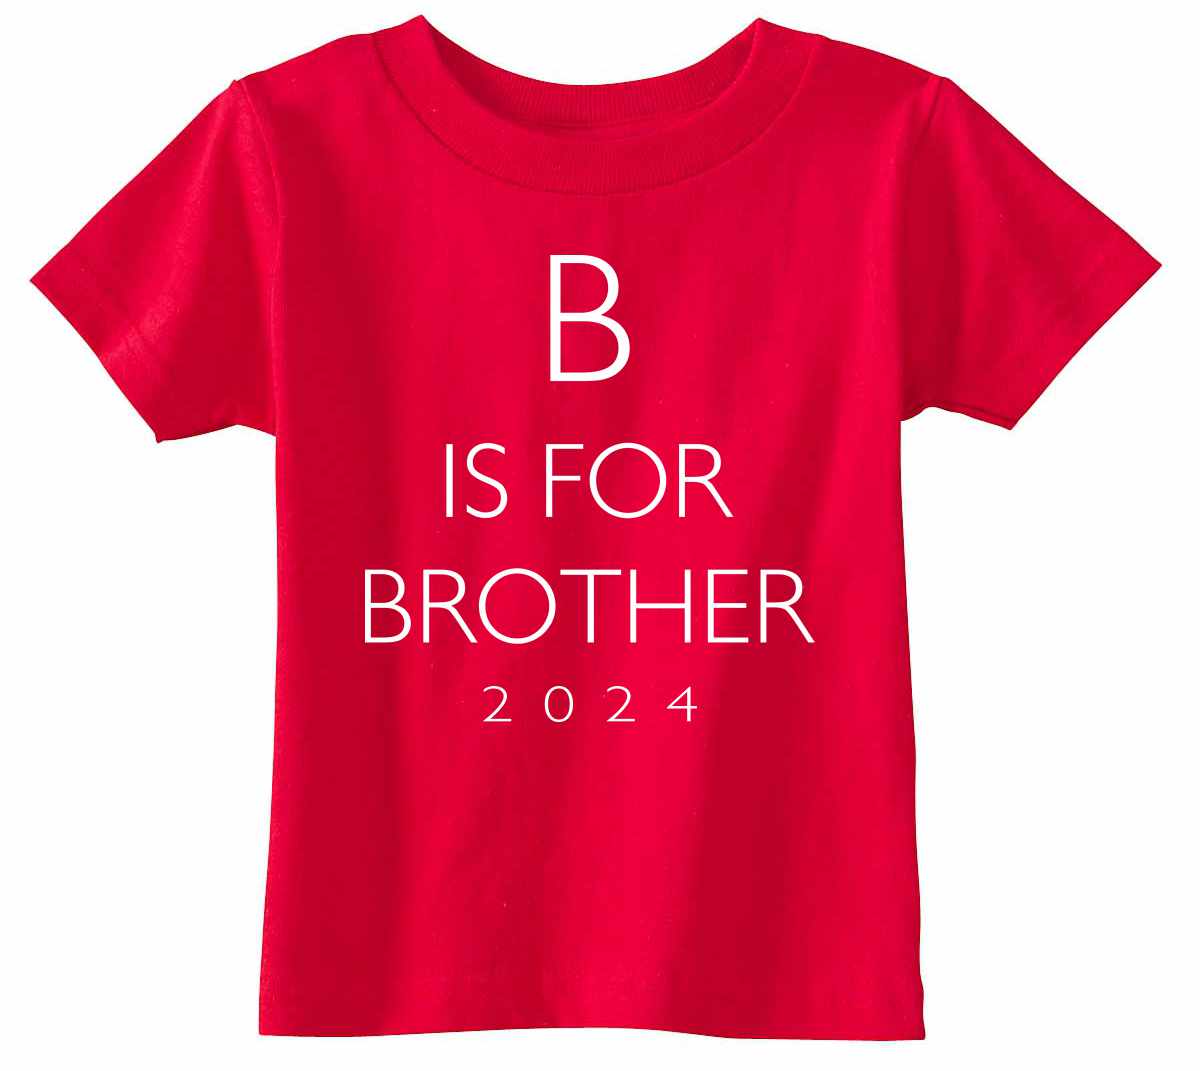 B Is For Brother 2024 on Infant-Toddler T-Shirt